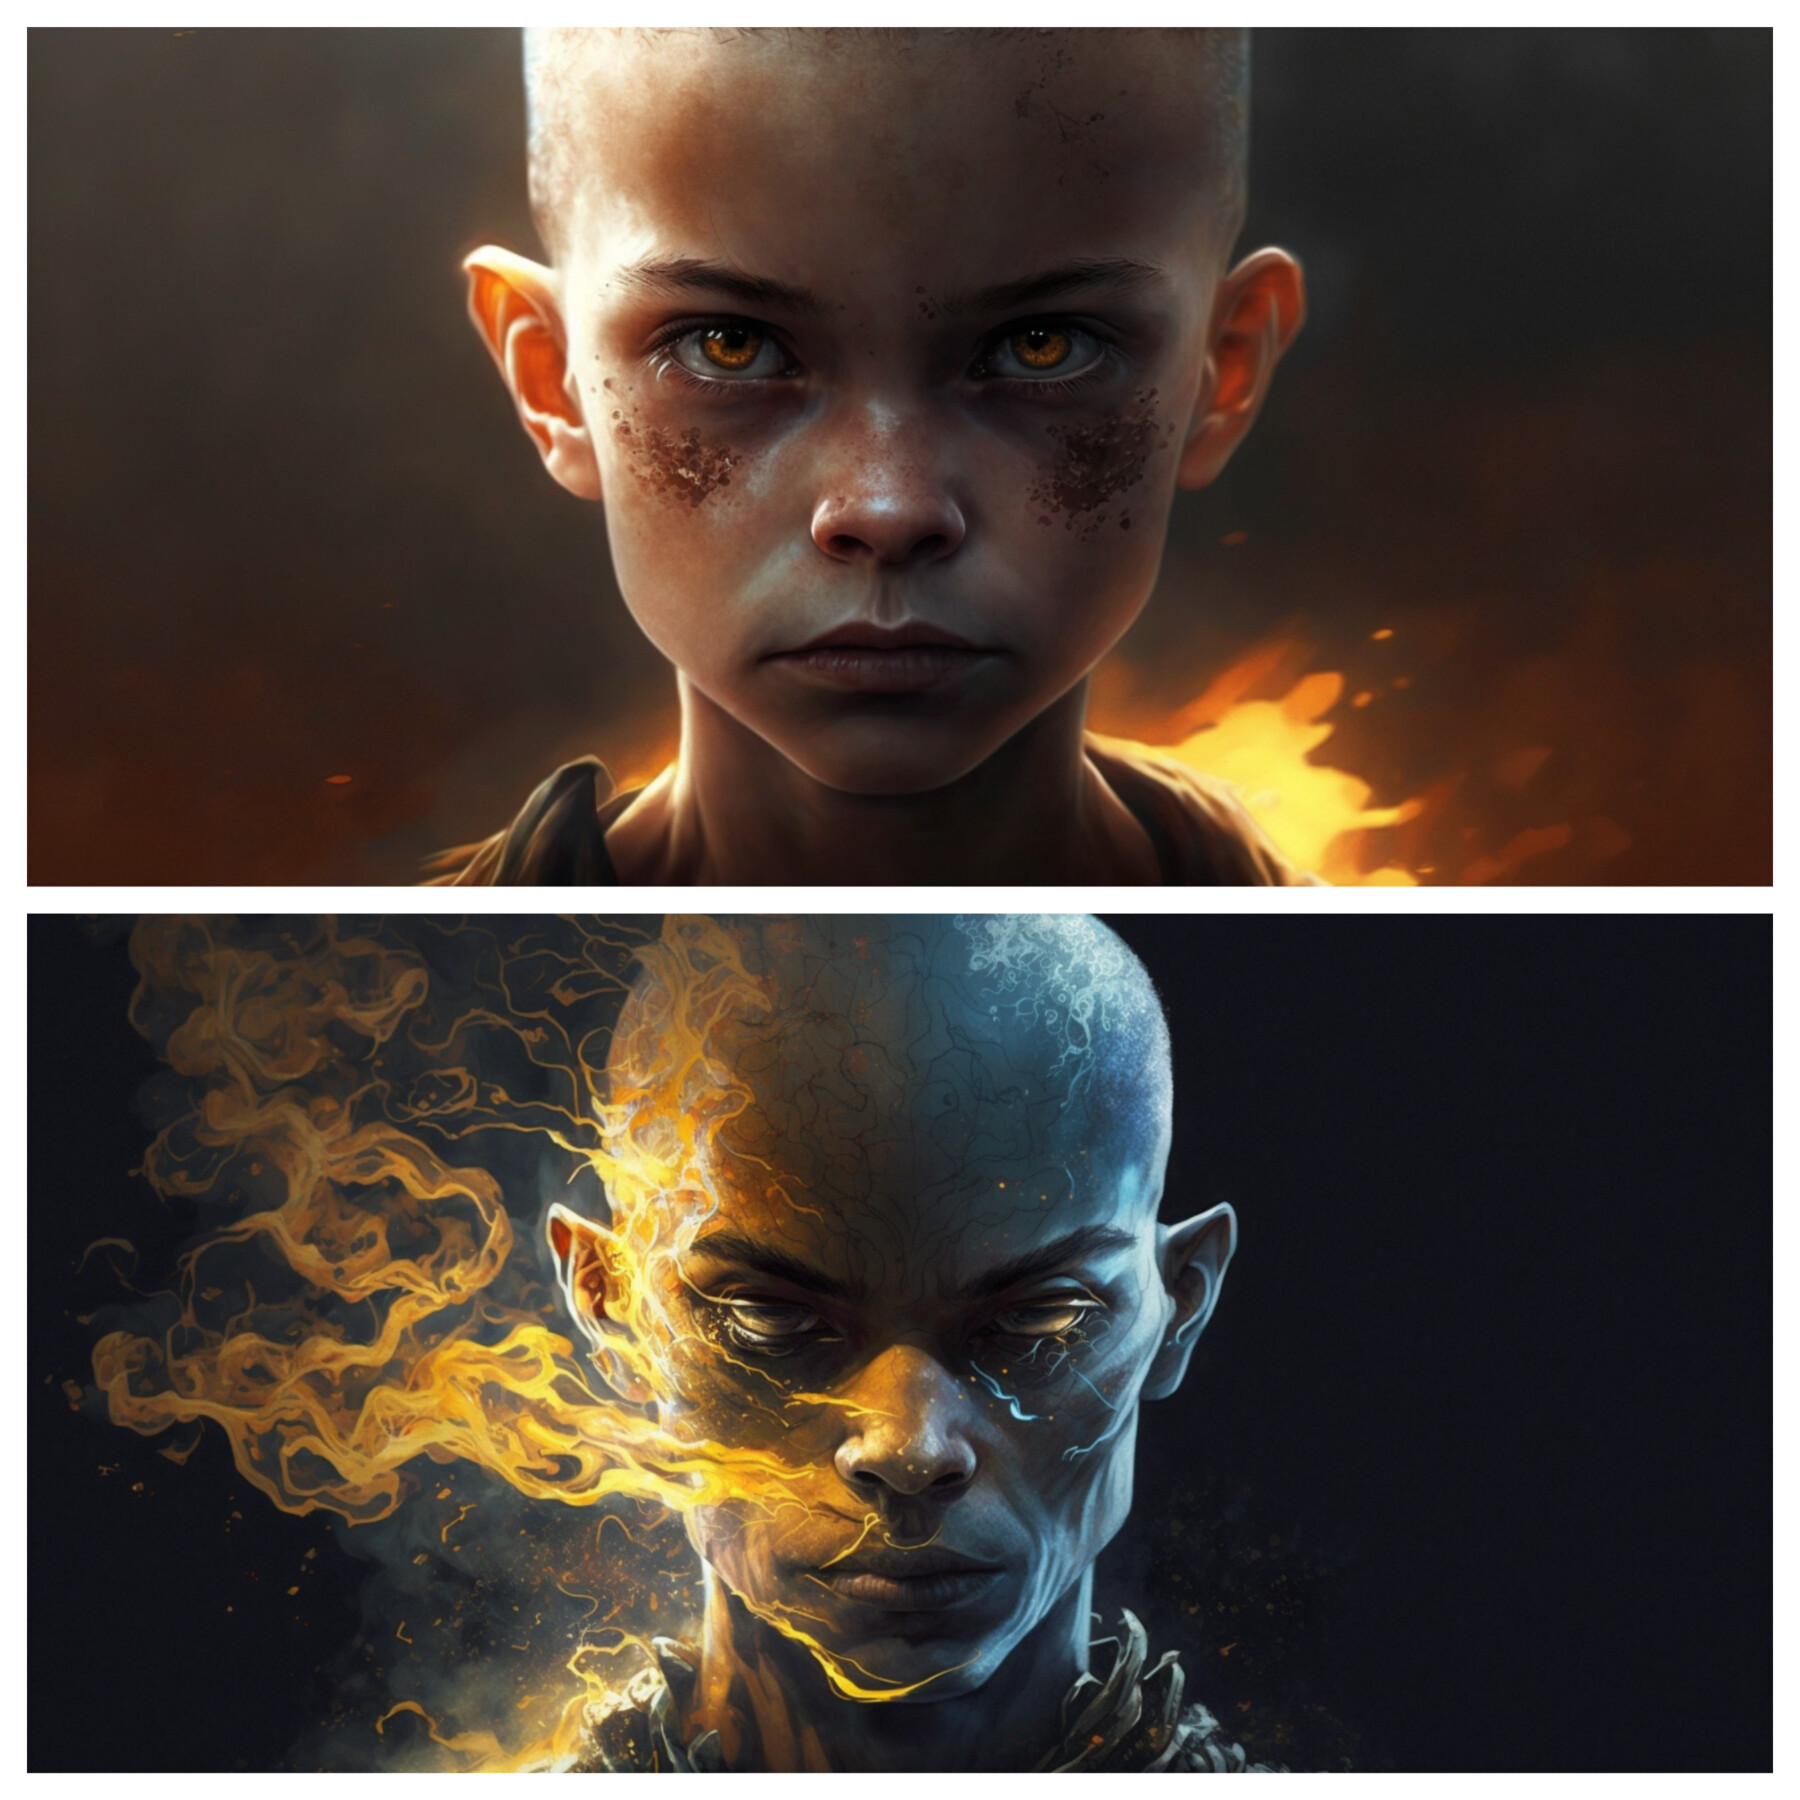 ArtStation - An intimidating promt for your games and | Artworks